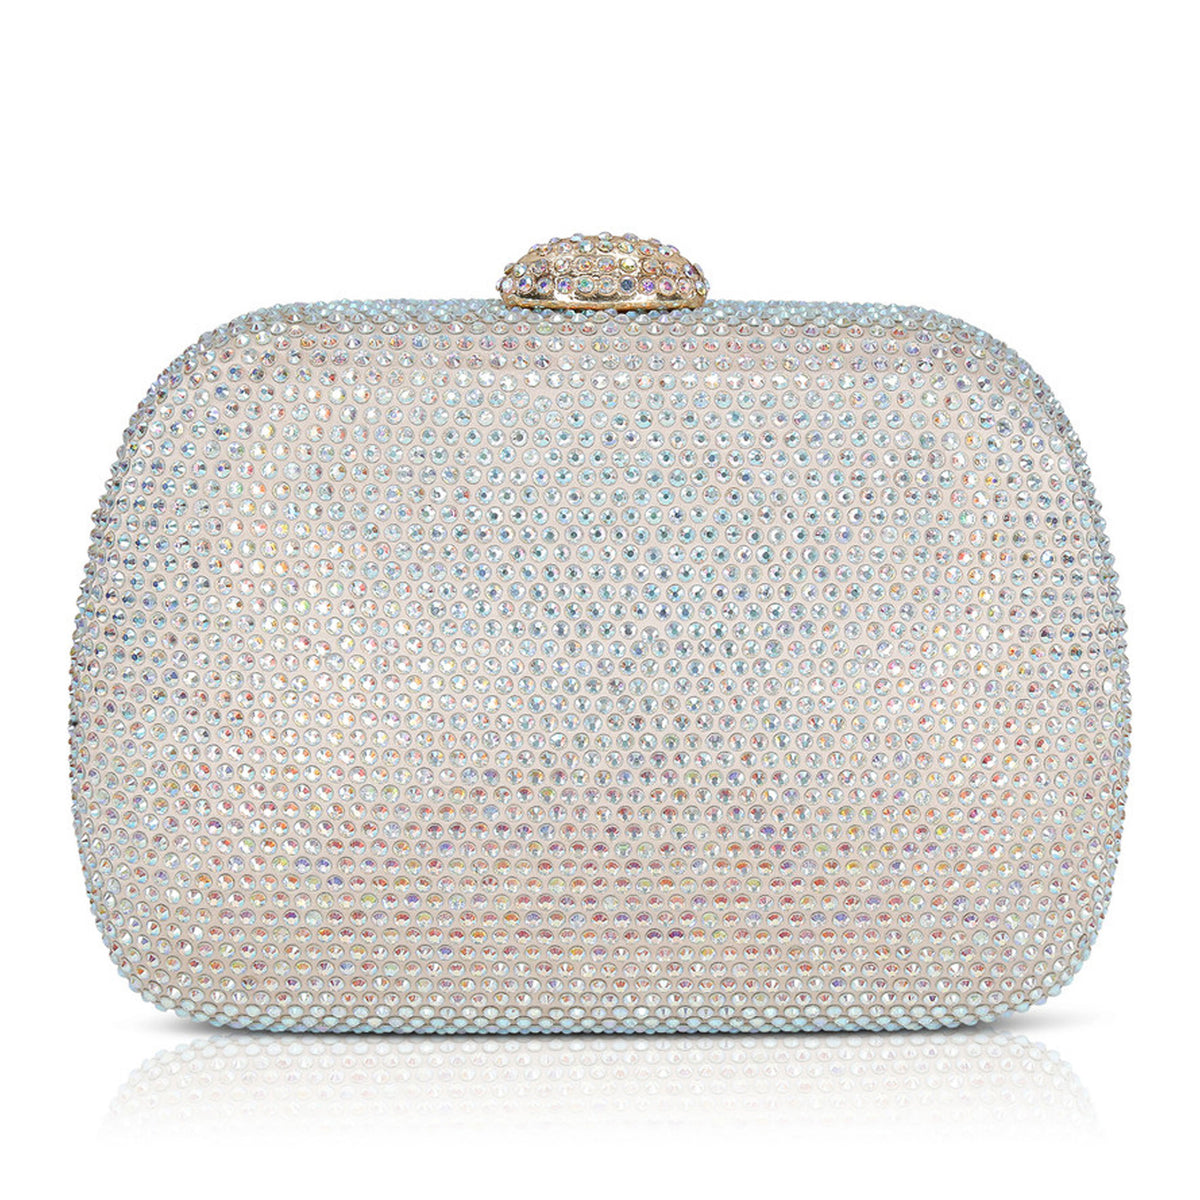 Jewel Satin Minaudiere With All Over Crystals